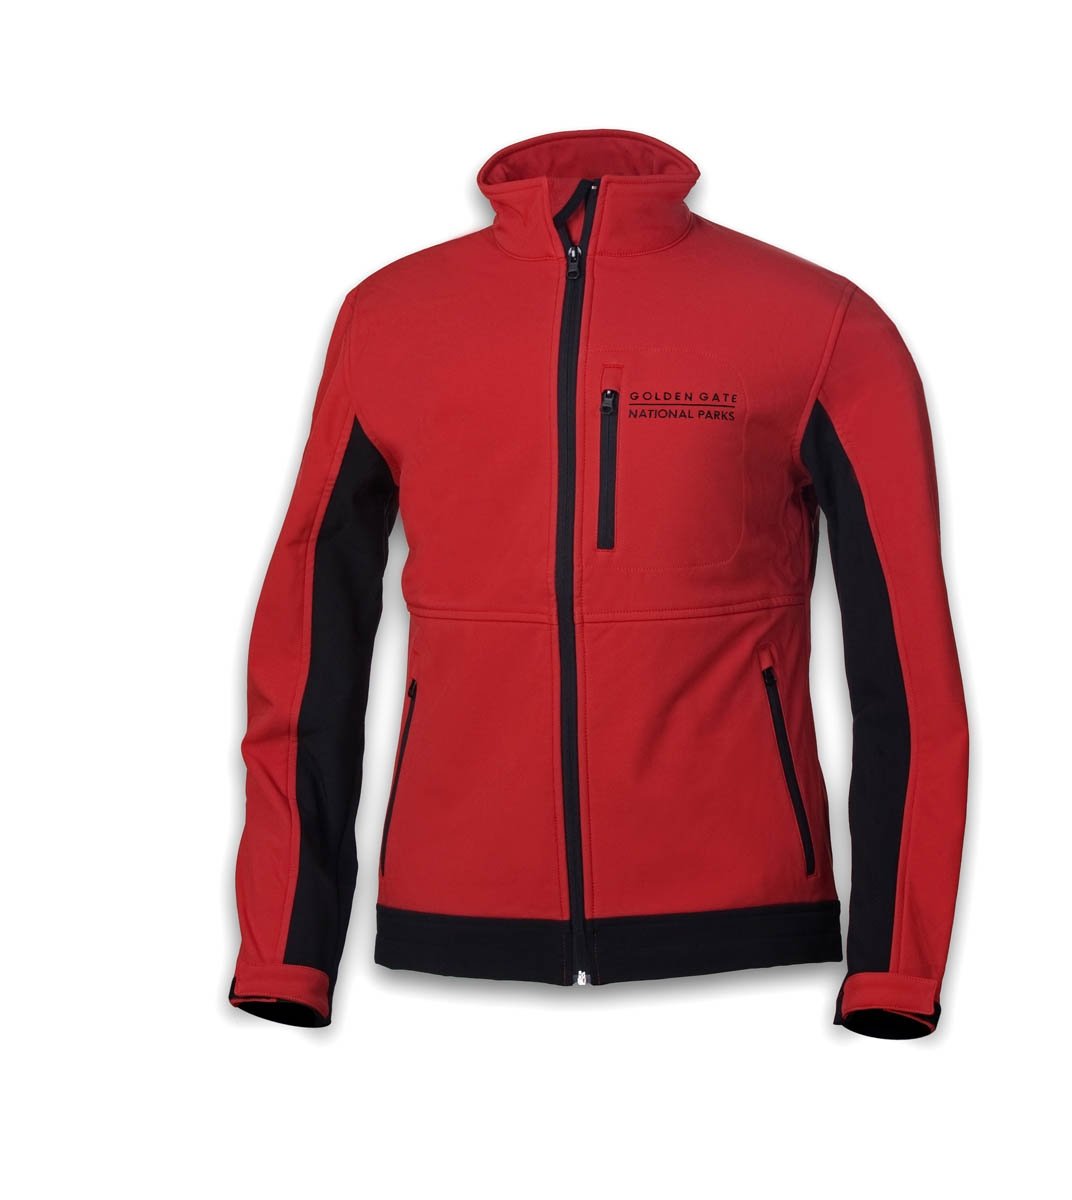 Red softshell jacket with black accents and black embroidered Golden Gate National Parks text on left breast.